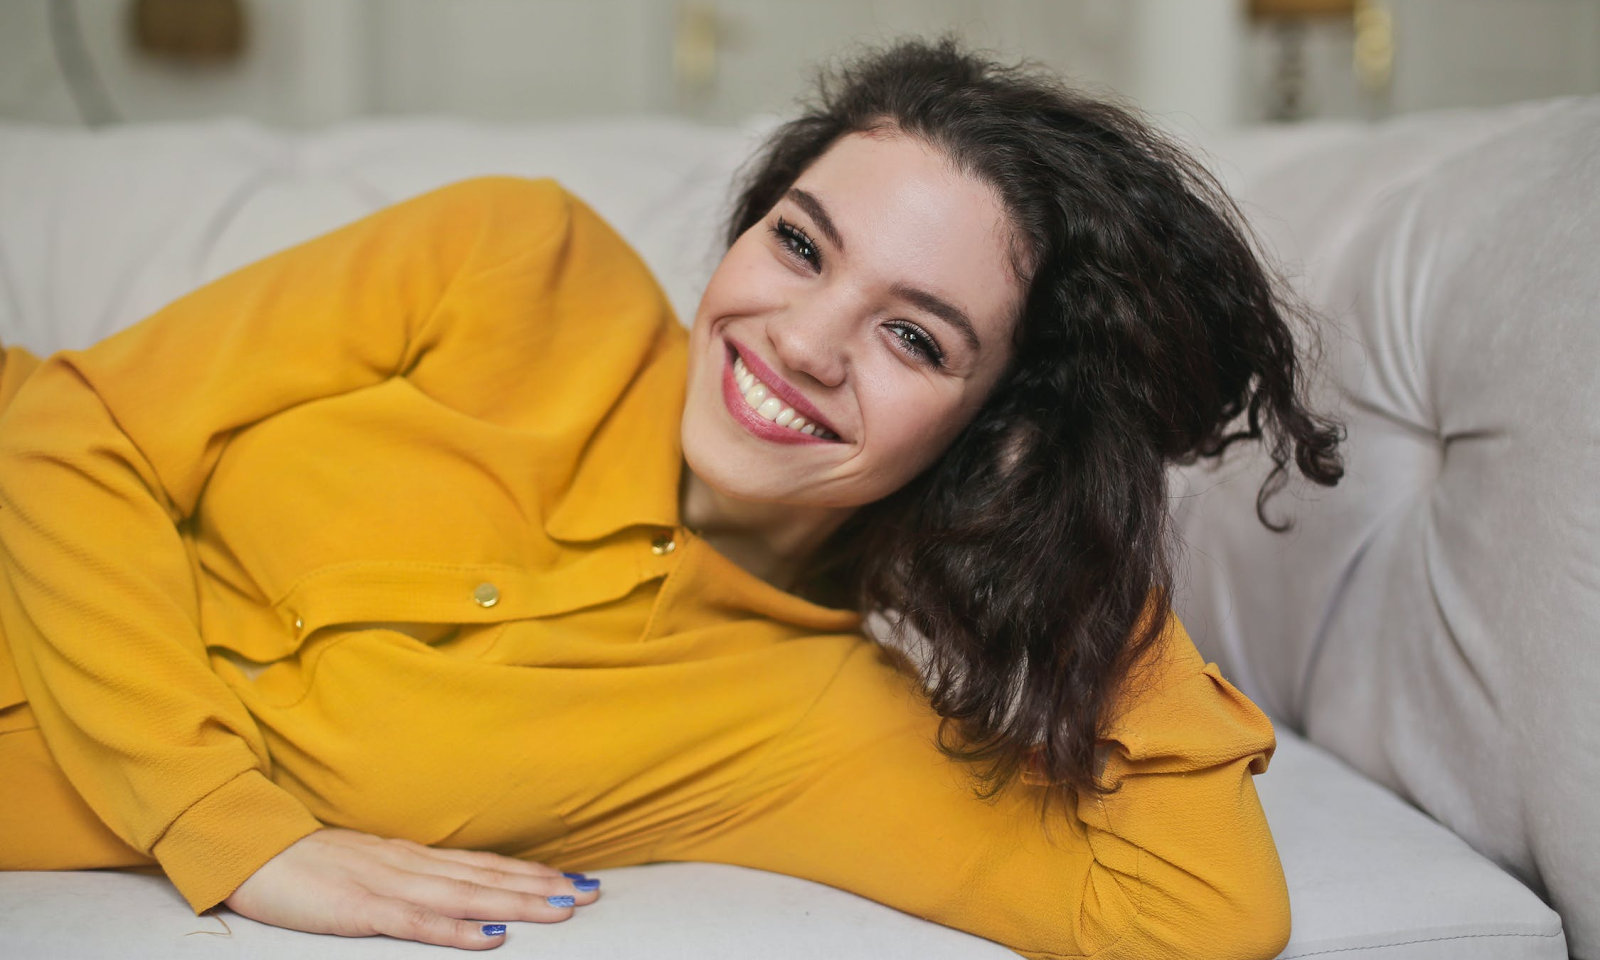 Woman Smiling Laying Down on a Sofa